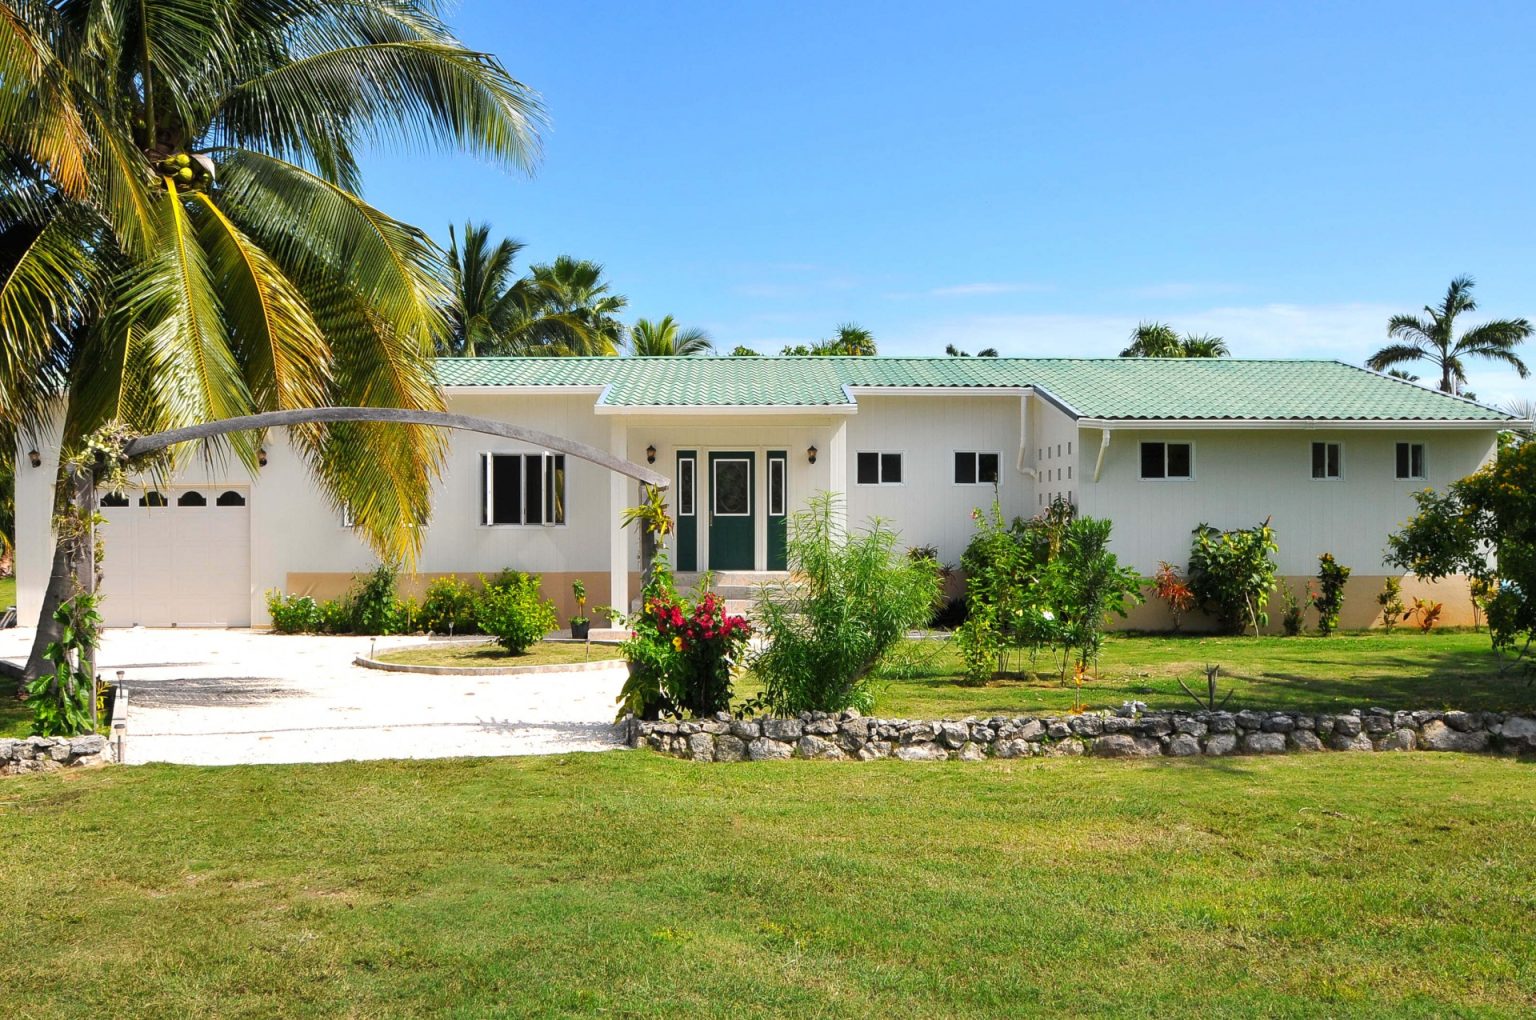 Dive into San Pedro Belize Real Estate with RE/MAX Expertise